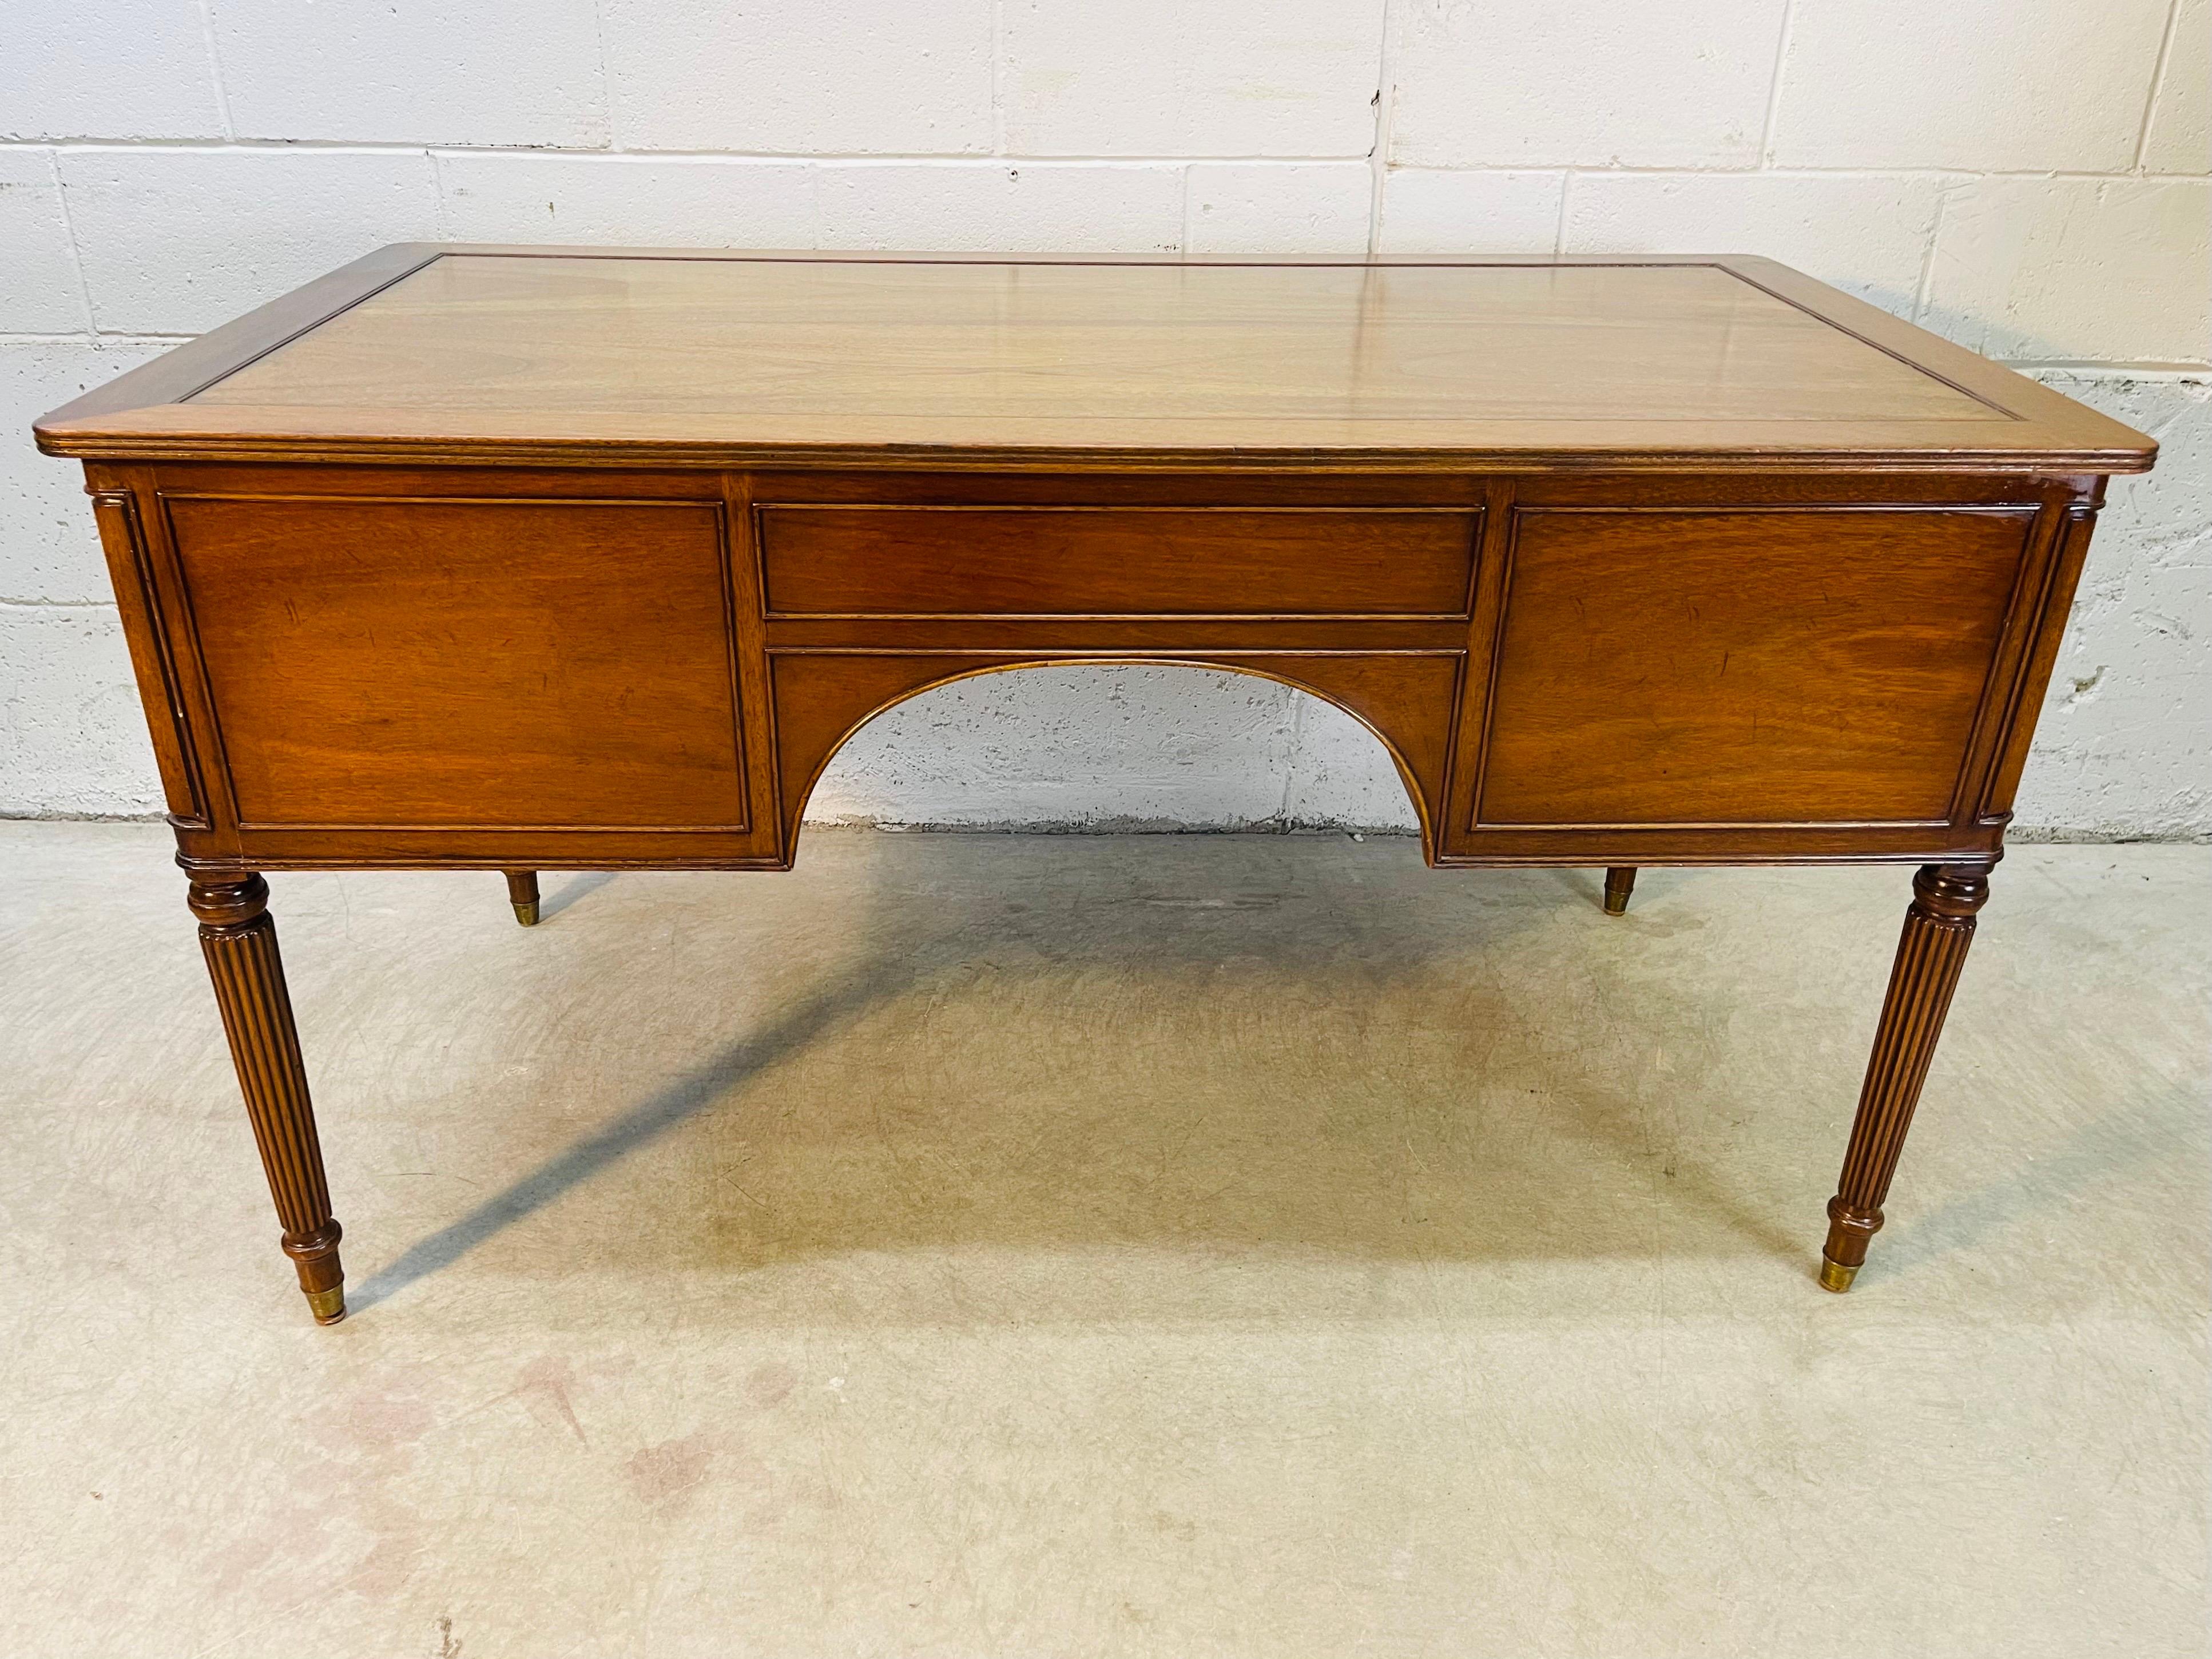 English Neoclassical Sheraton Style Mahogany Desk by Kittinger For Sale 6